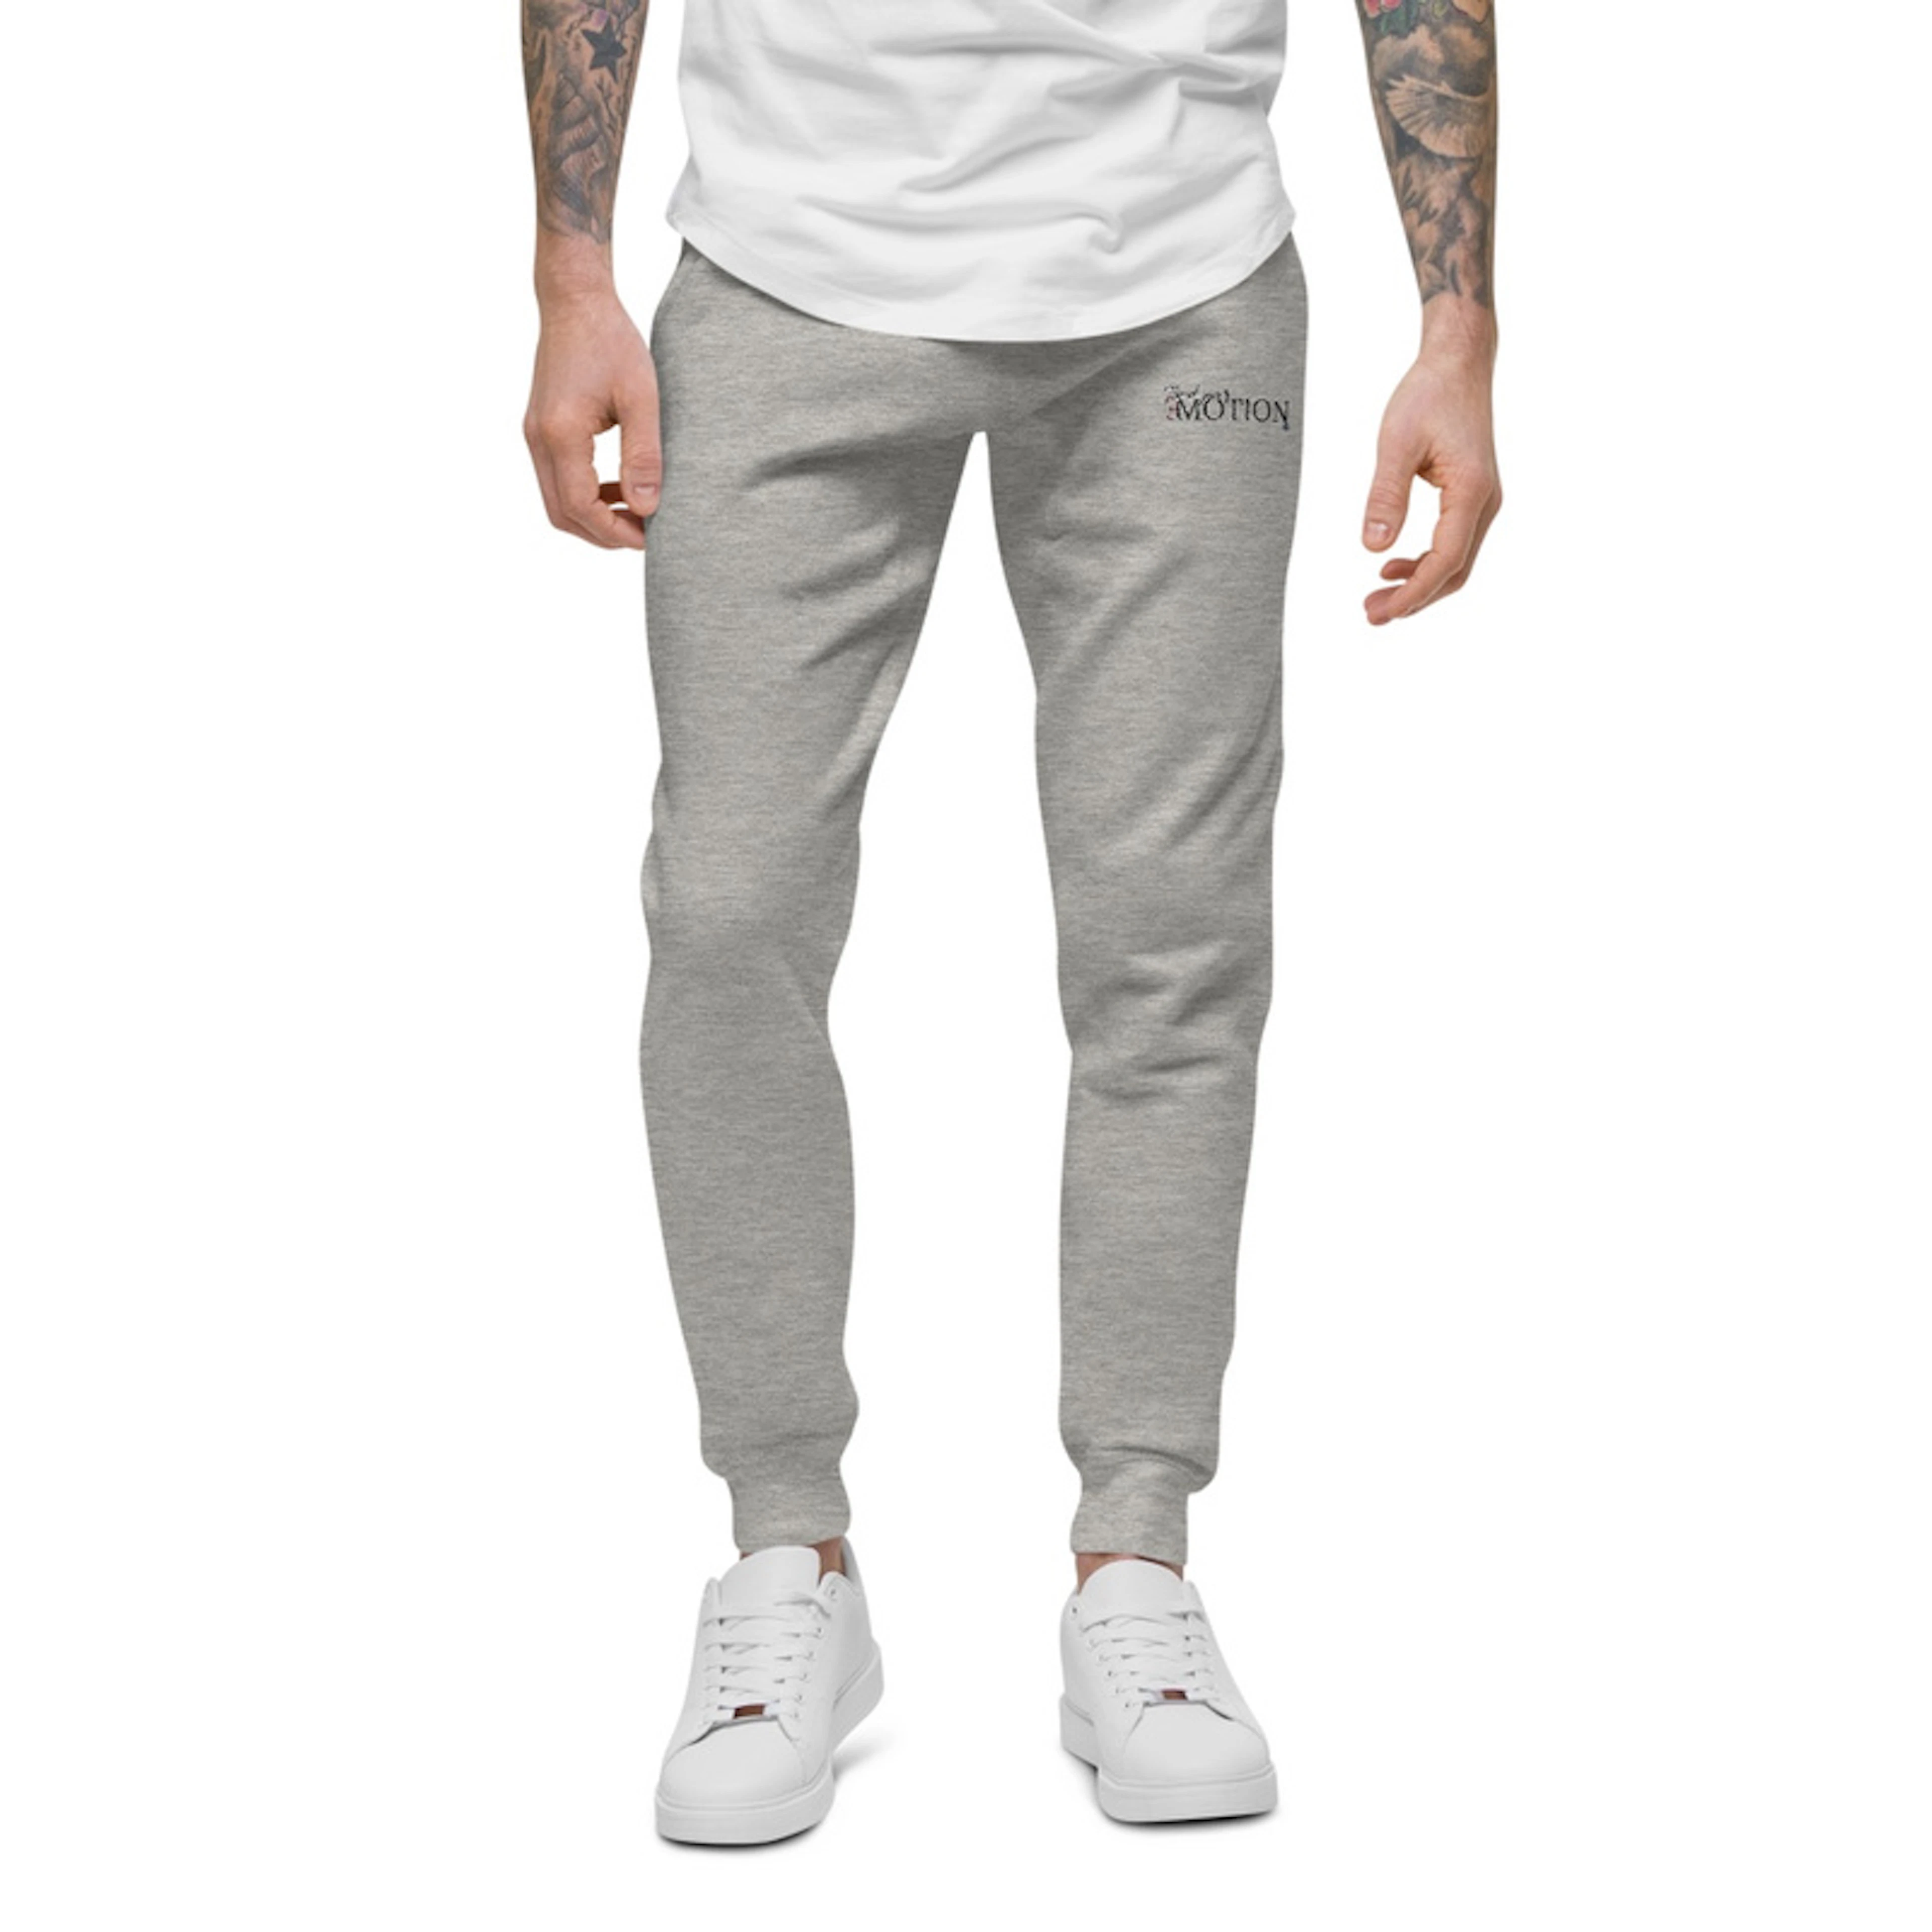 Find your motion lt grey stitch joggers